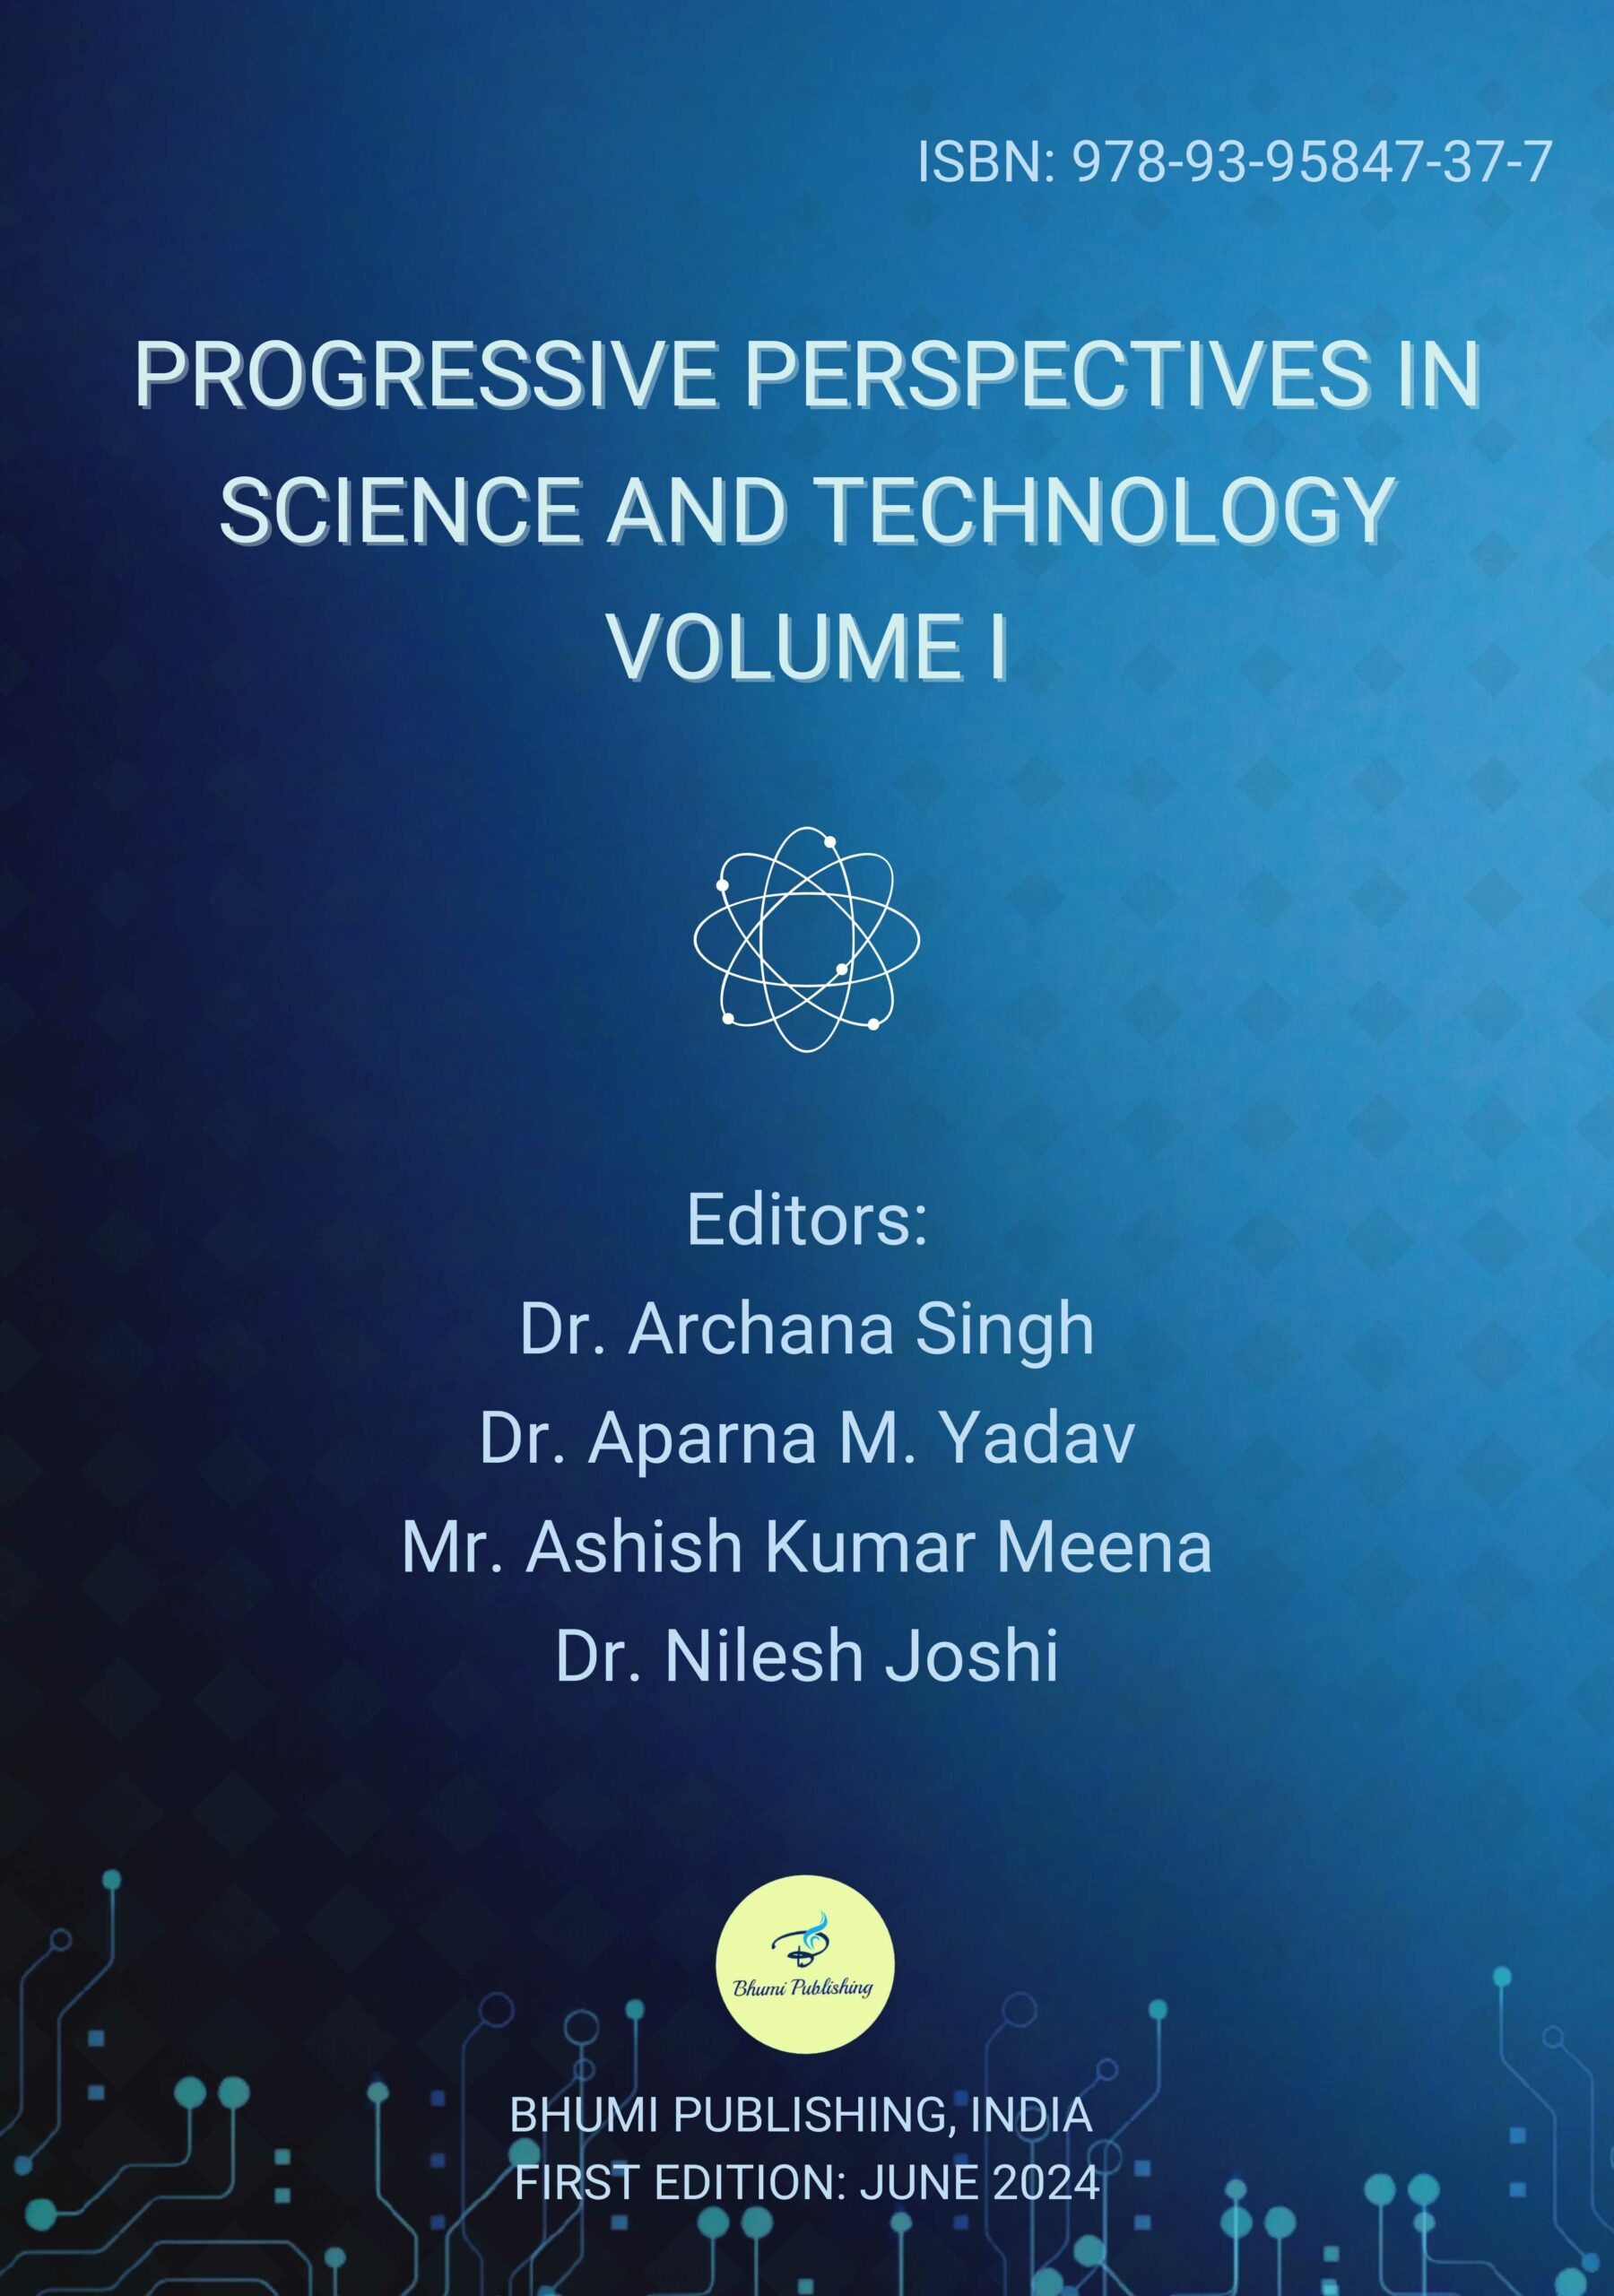 Progressive Perspectives in Science and Technology Volume I